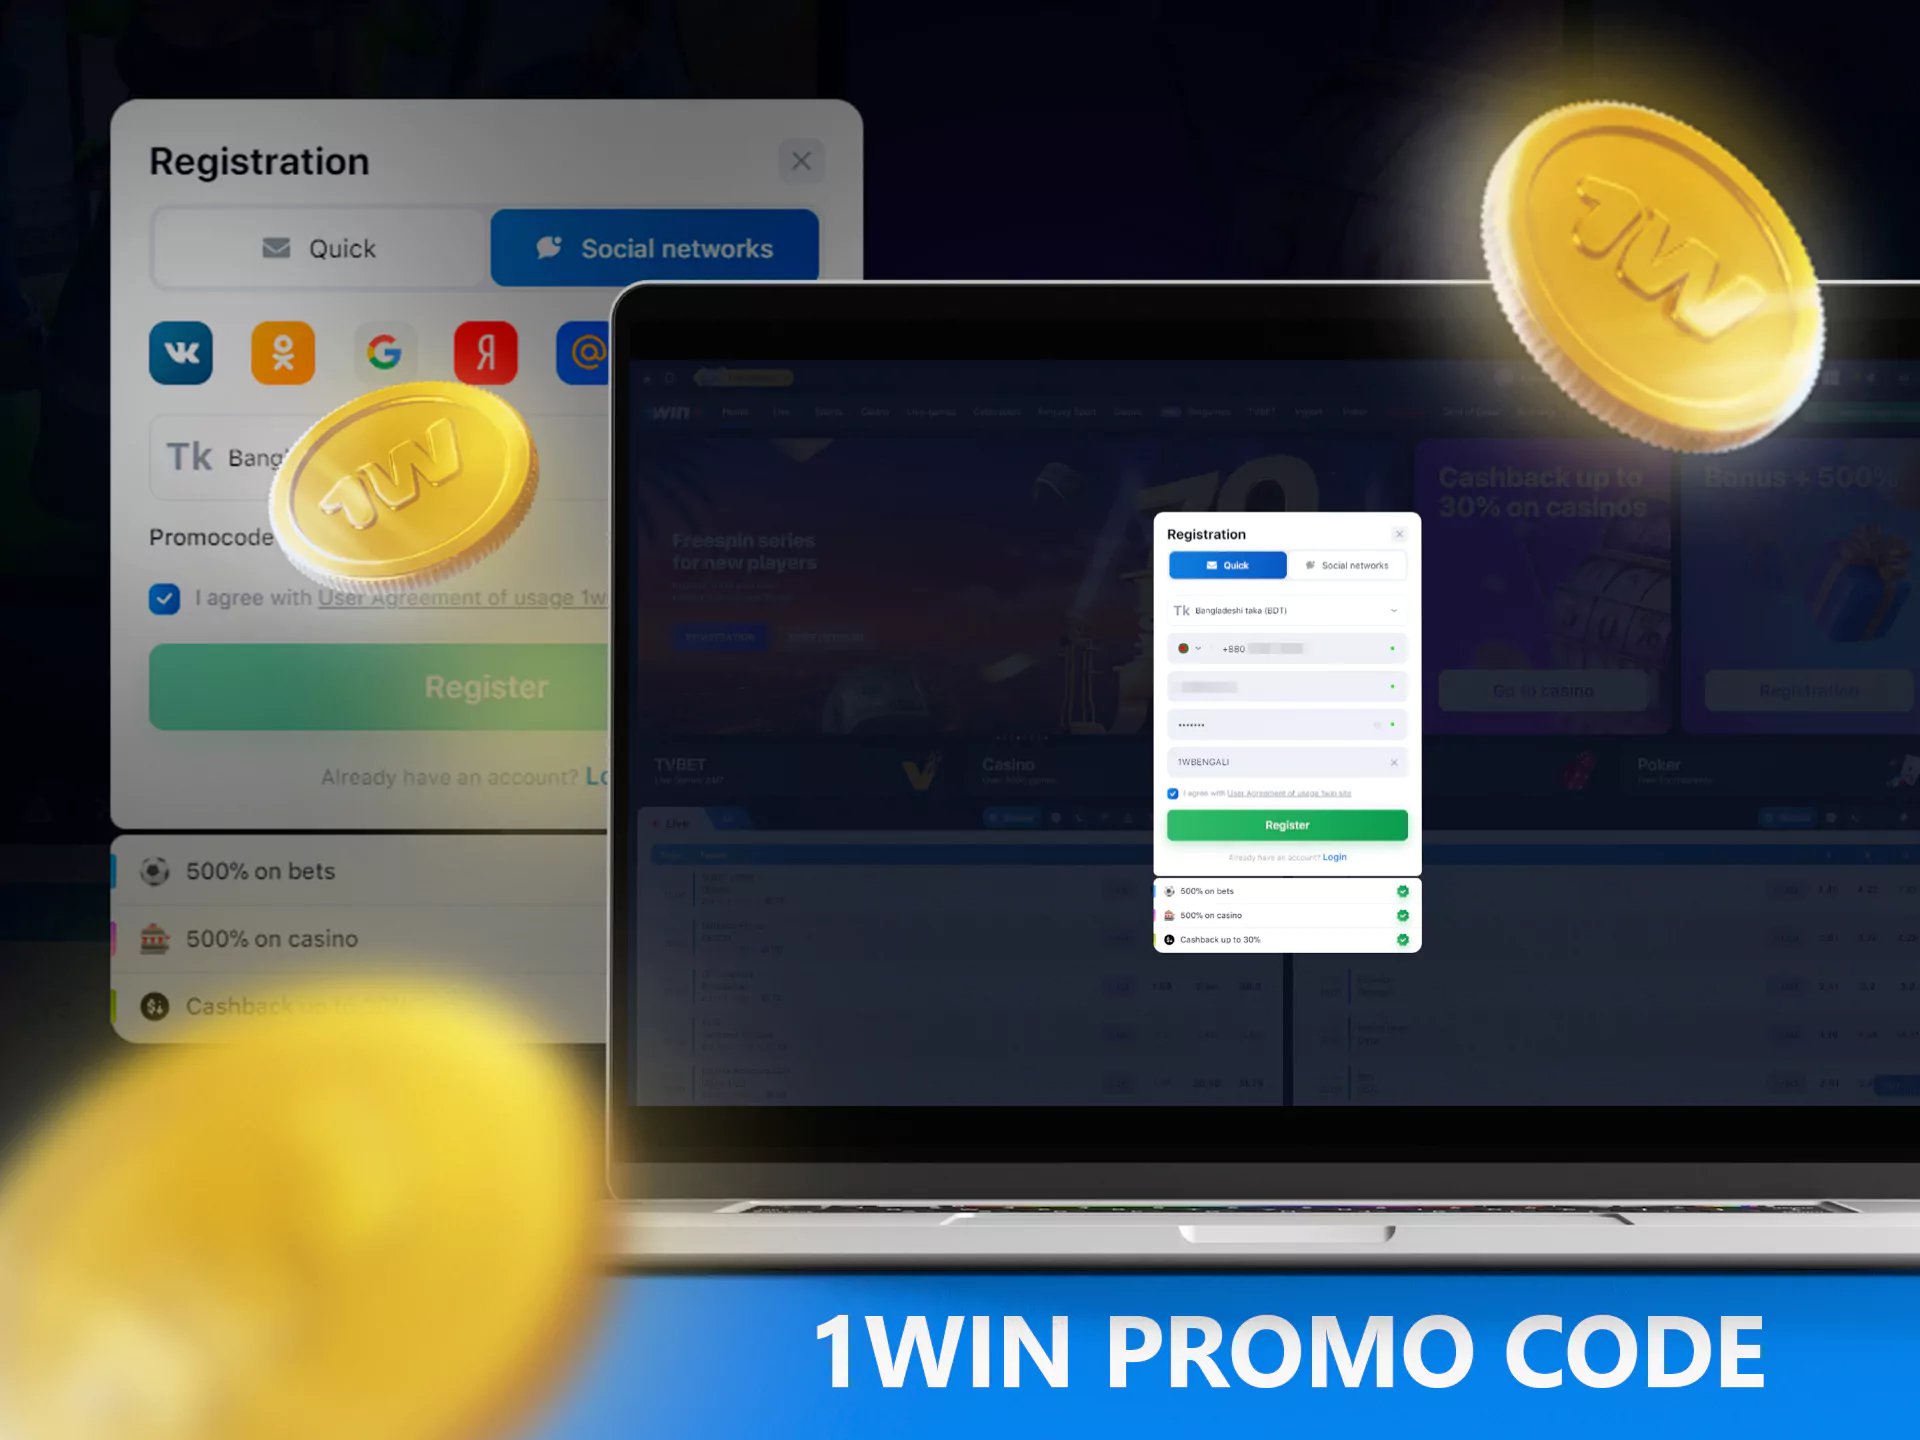 Create an account on 1win using a promo code to get a bonus for a quick start.